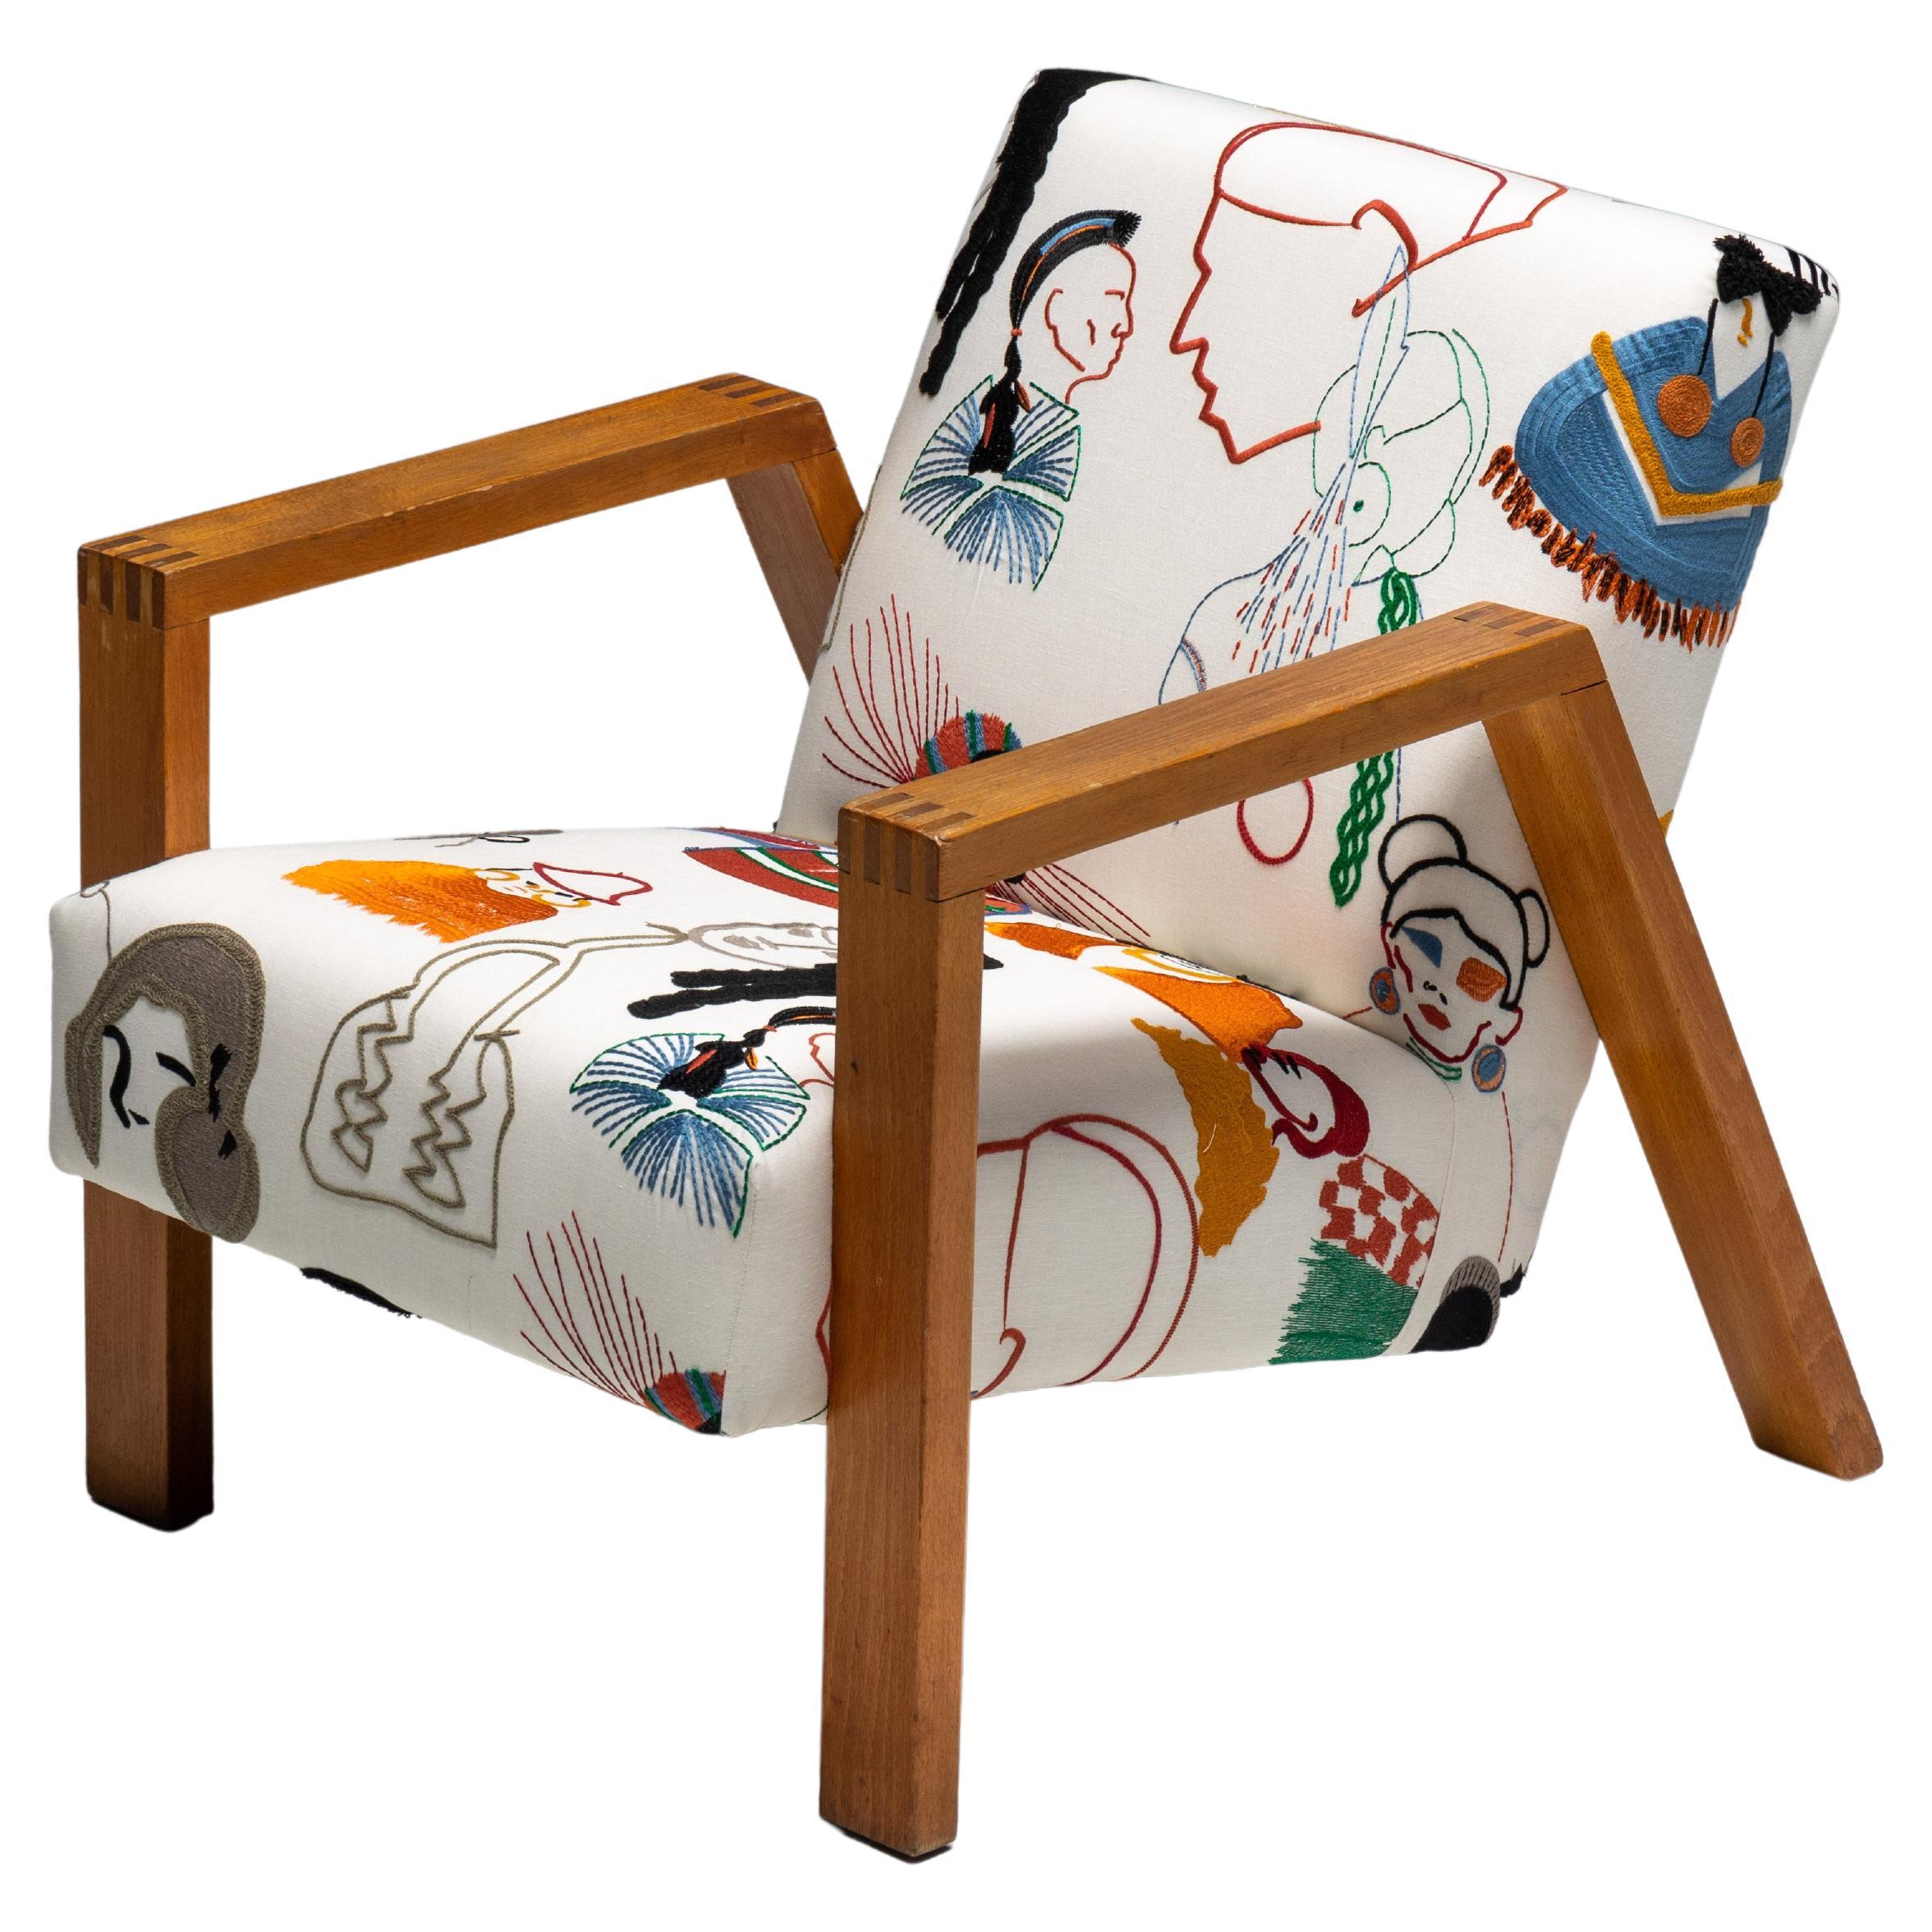 Dutch Modernist Chair in Pierre Frey Fabric, 1960s For Sale